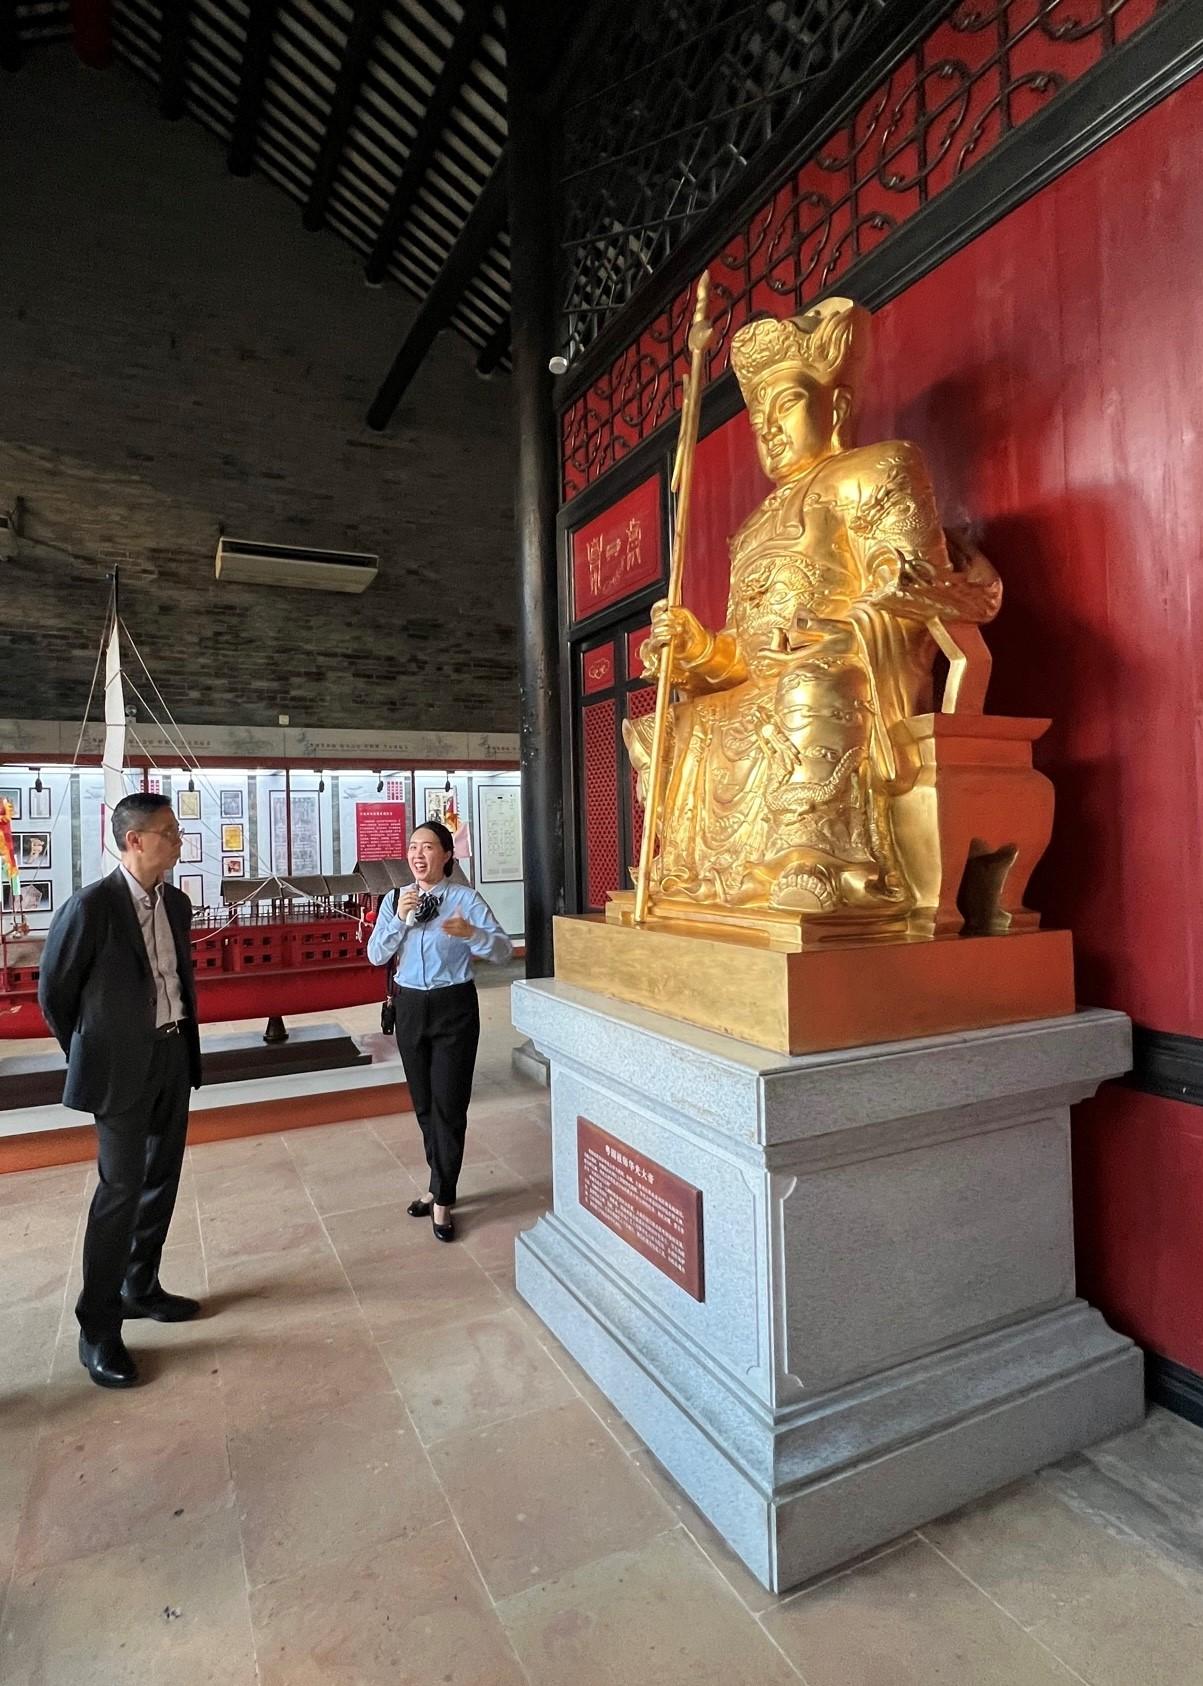 The Secretary for Culture, Sports and Tourism, Mr Kevin Yeung (left), visited Foshan yesterday (July 11). Photo shows Mr Yeung visiting the Guangdong Cantonese Opera Museum to get a grasp of the local efforts in promoting Cantonese opera.